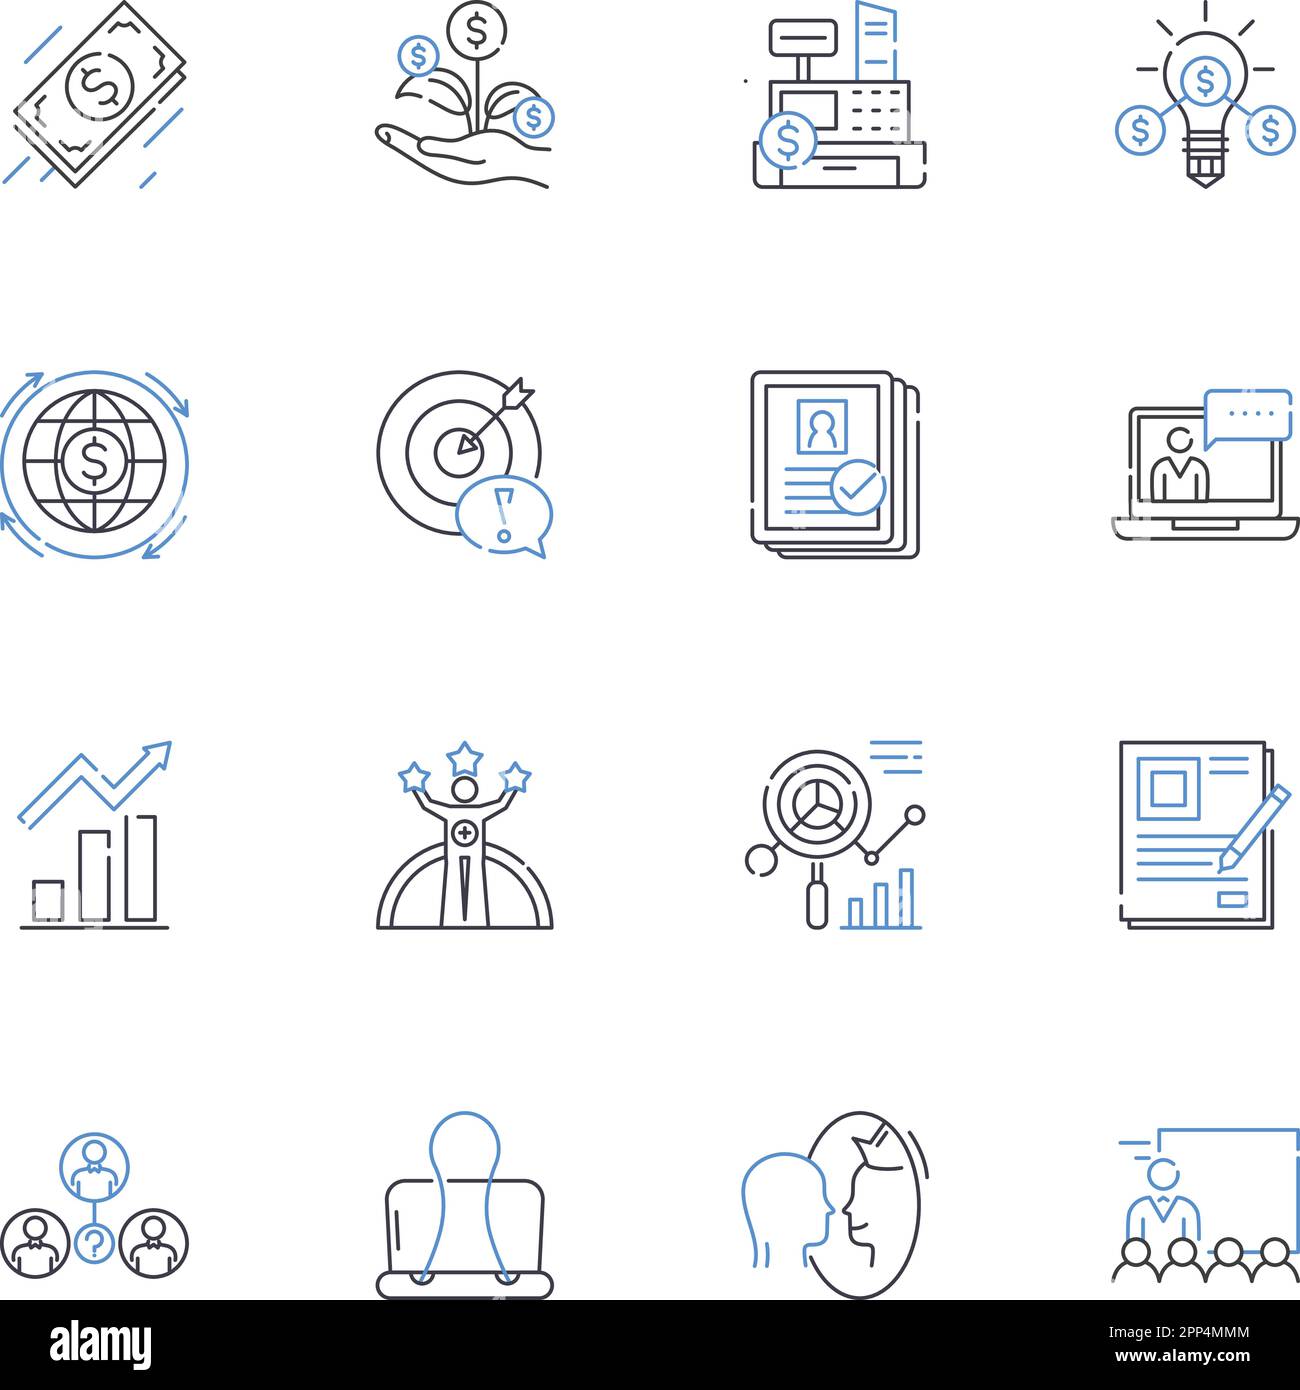 Business incubation line icons collection. Growth, Innovation, Collaboration, Mentorship, Entrepreneurship, Nerking, Funding vector and linear Stock Vector